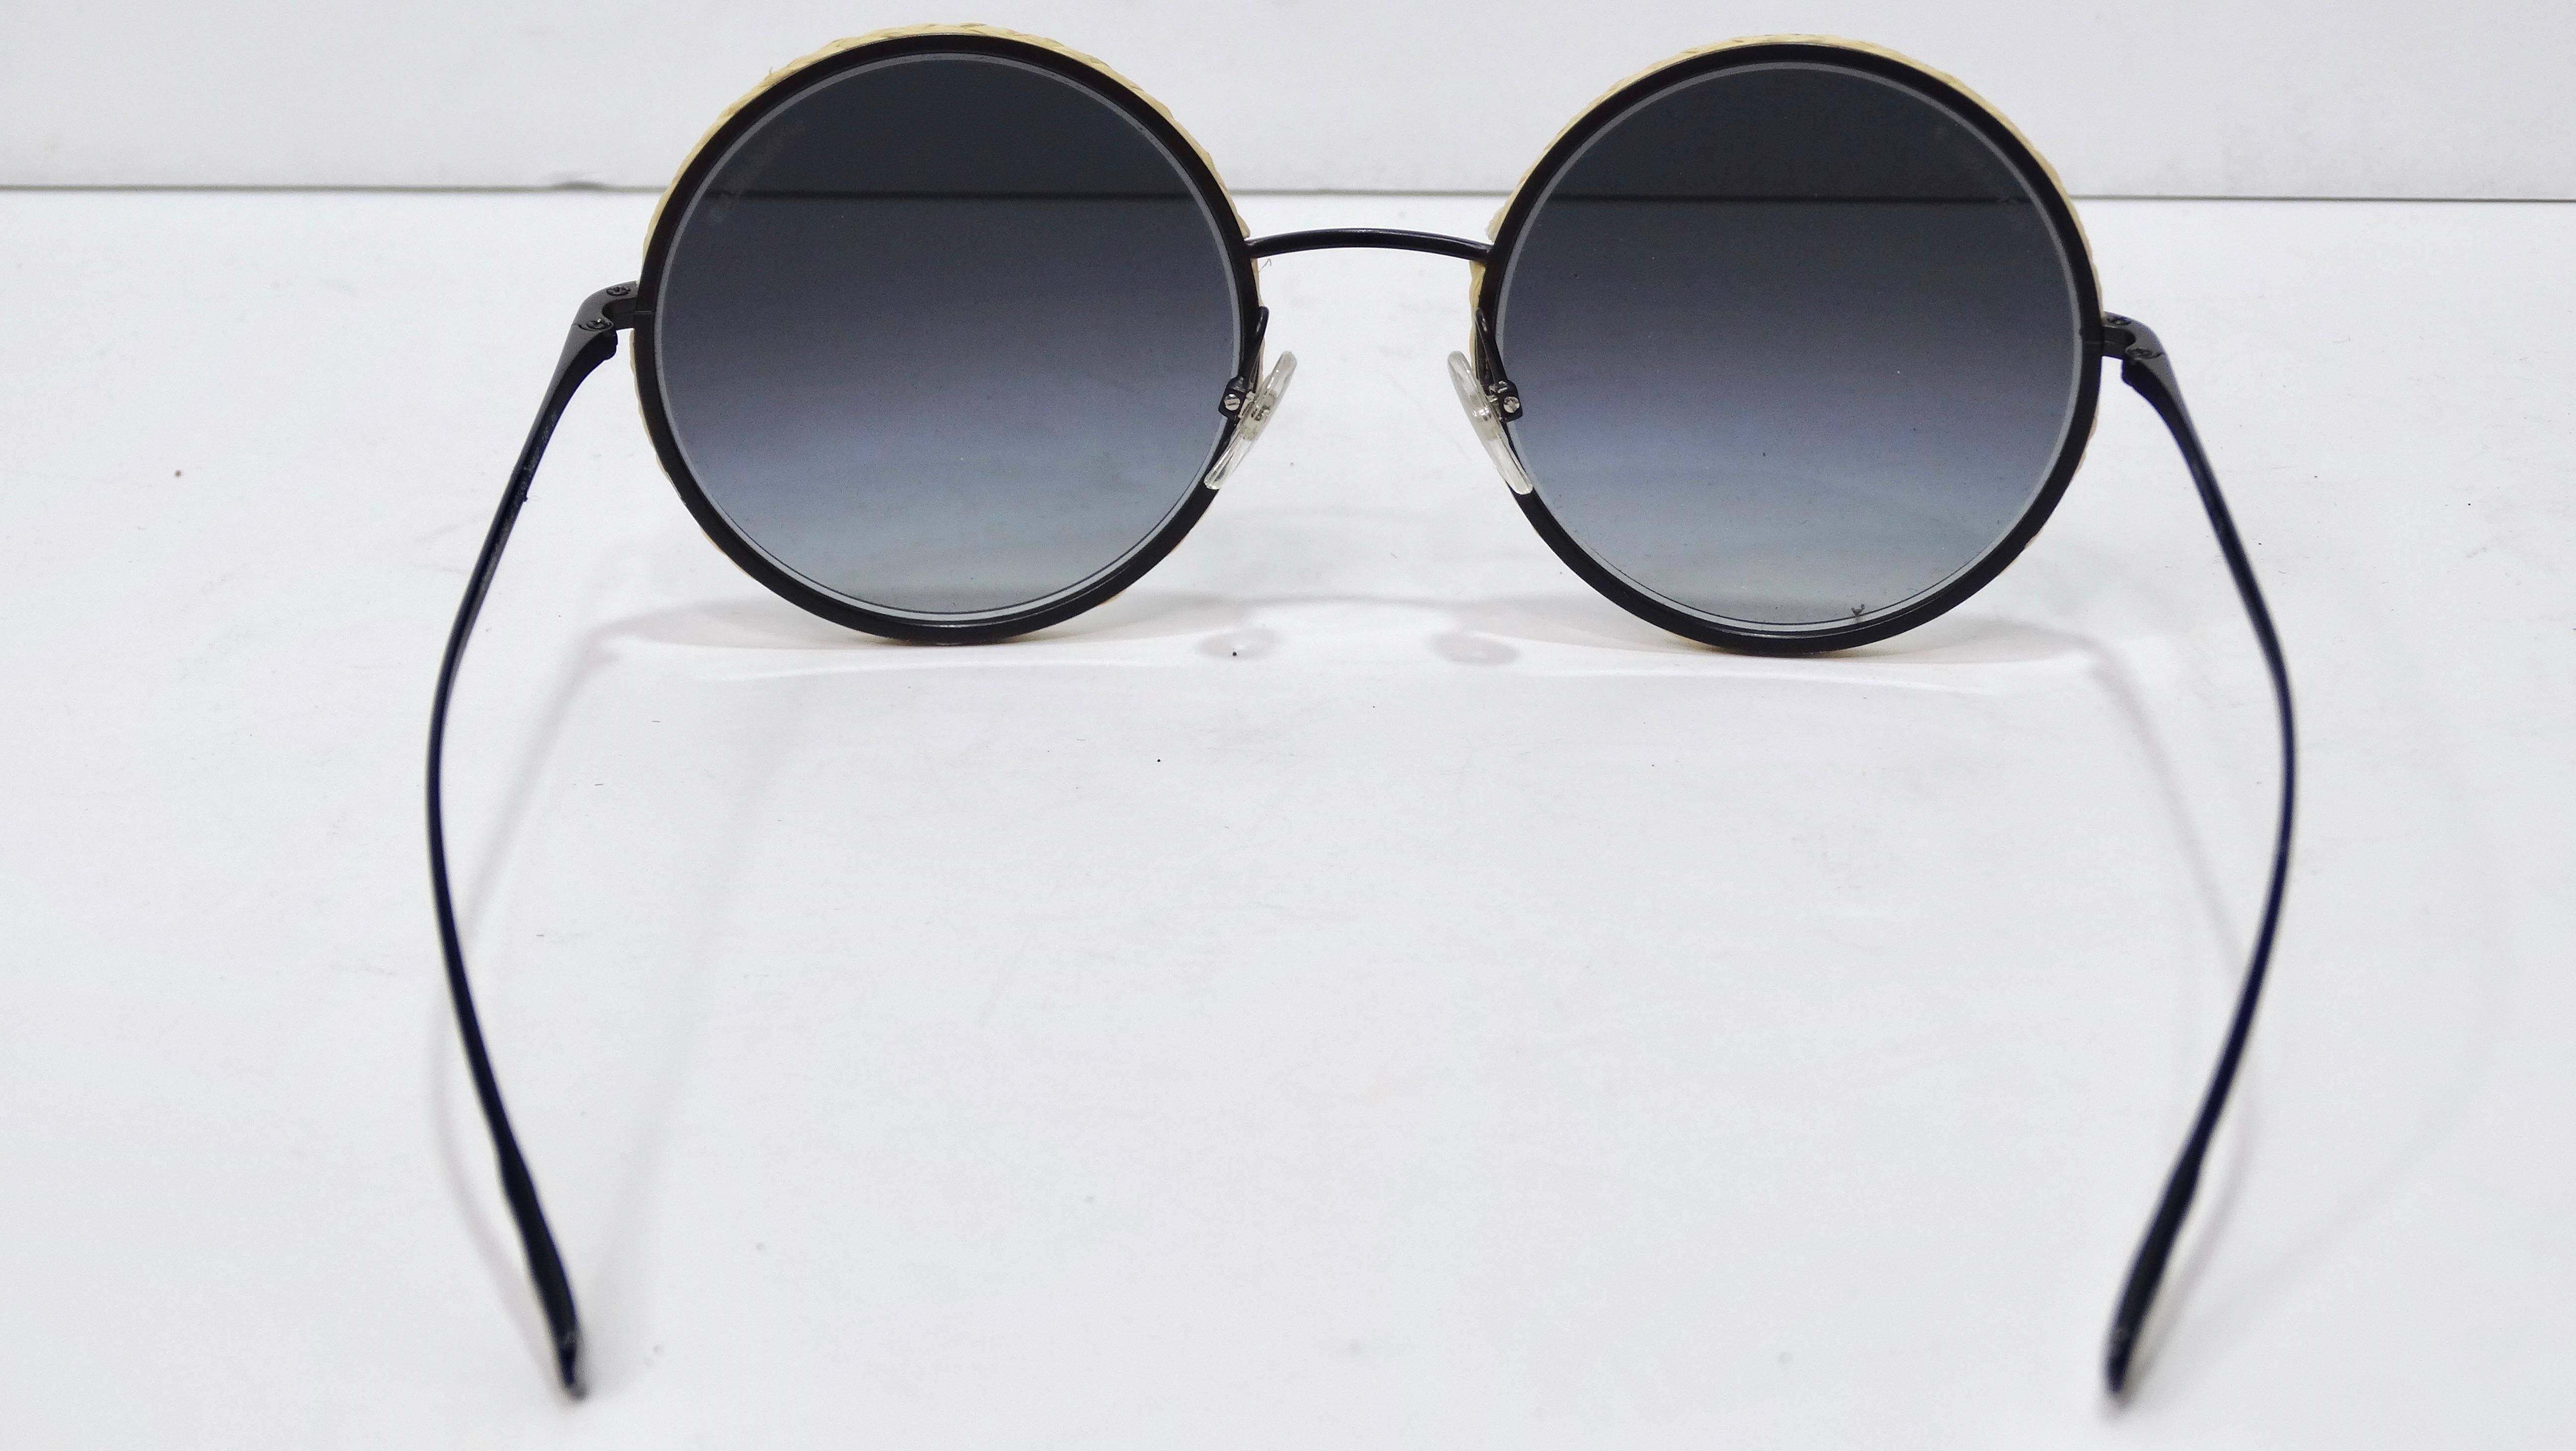 chanel black sunglasses with chanel on top